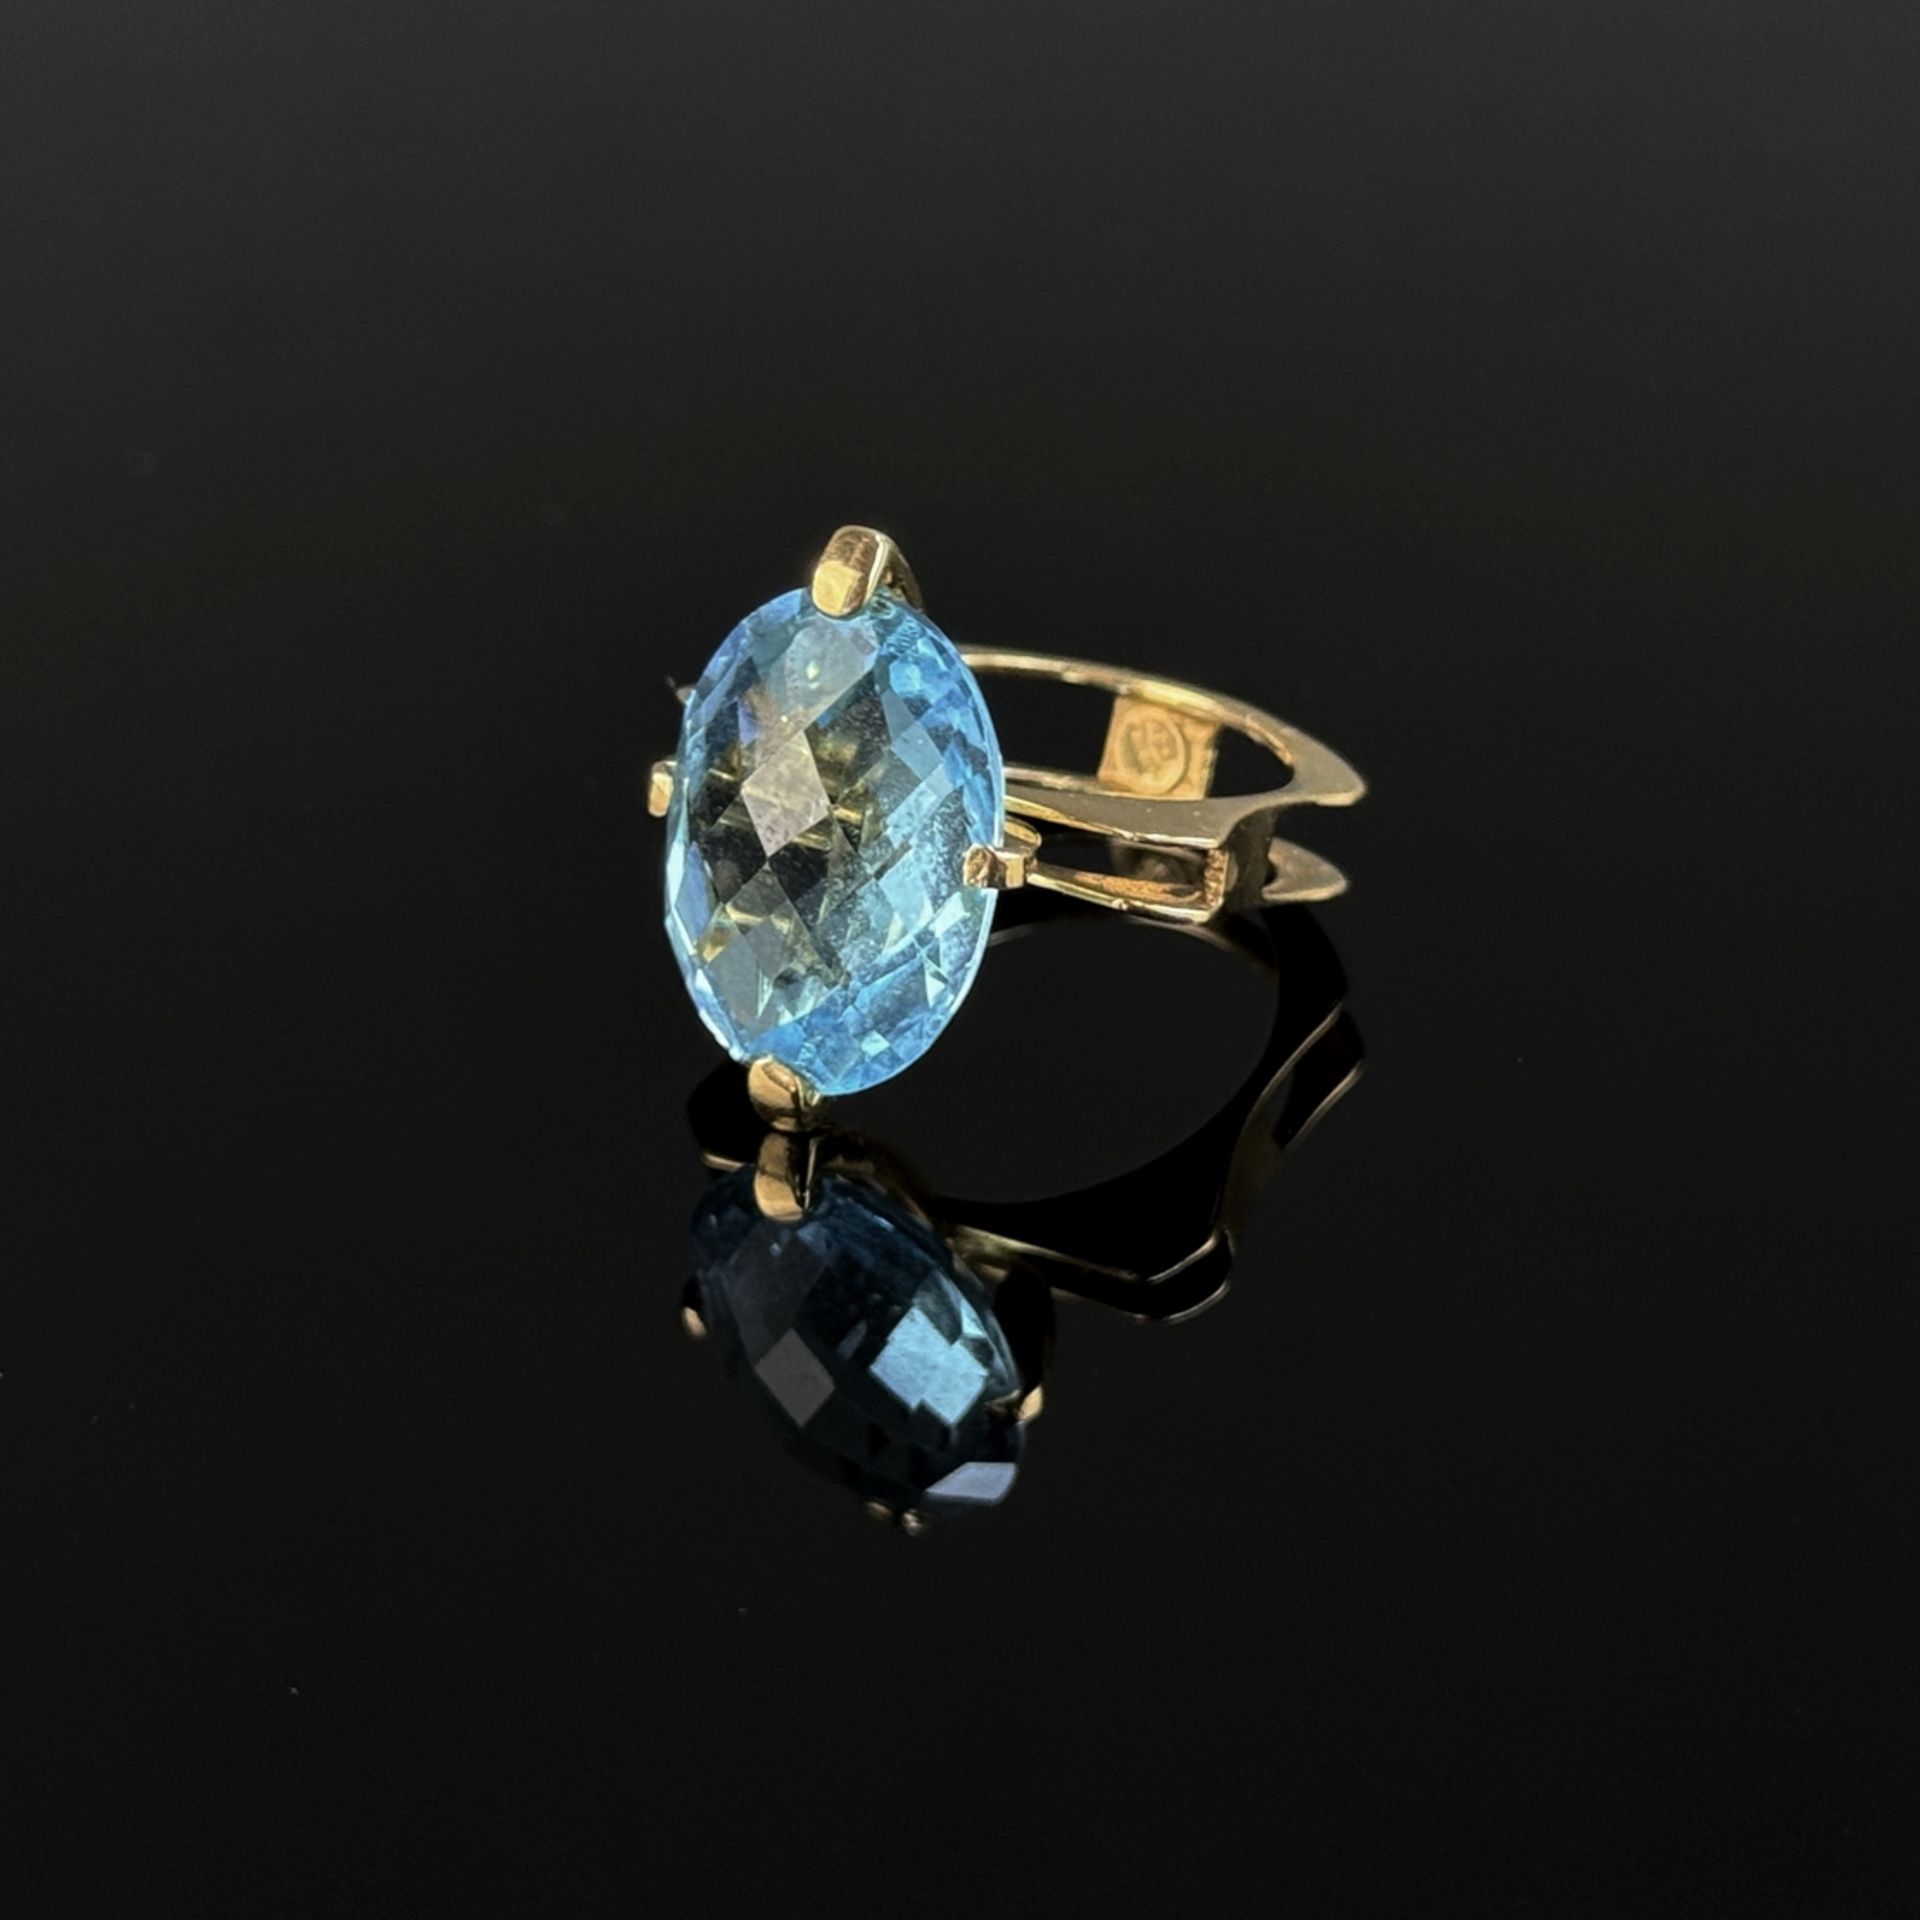 Modern ring, 750/18K yellow gold (hallmarked), total weight 7.88g, large light blue, oval, faceted